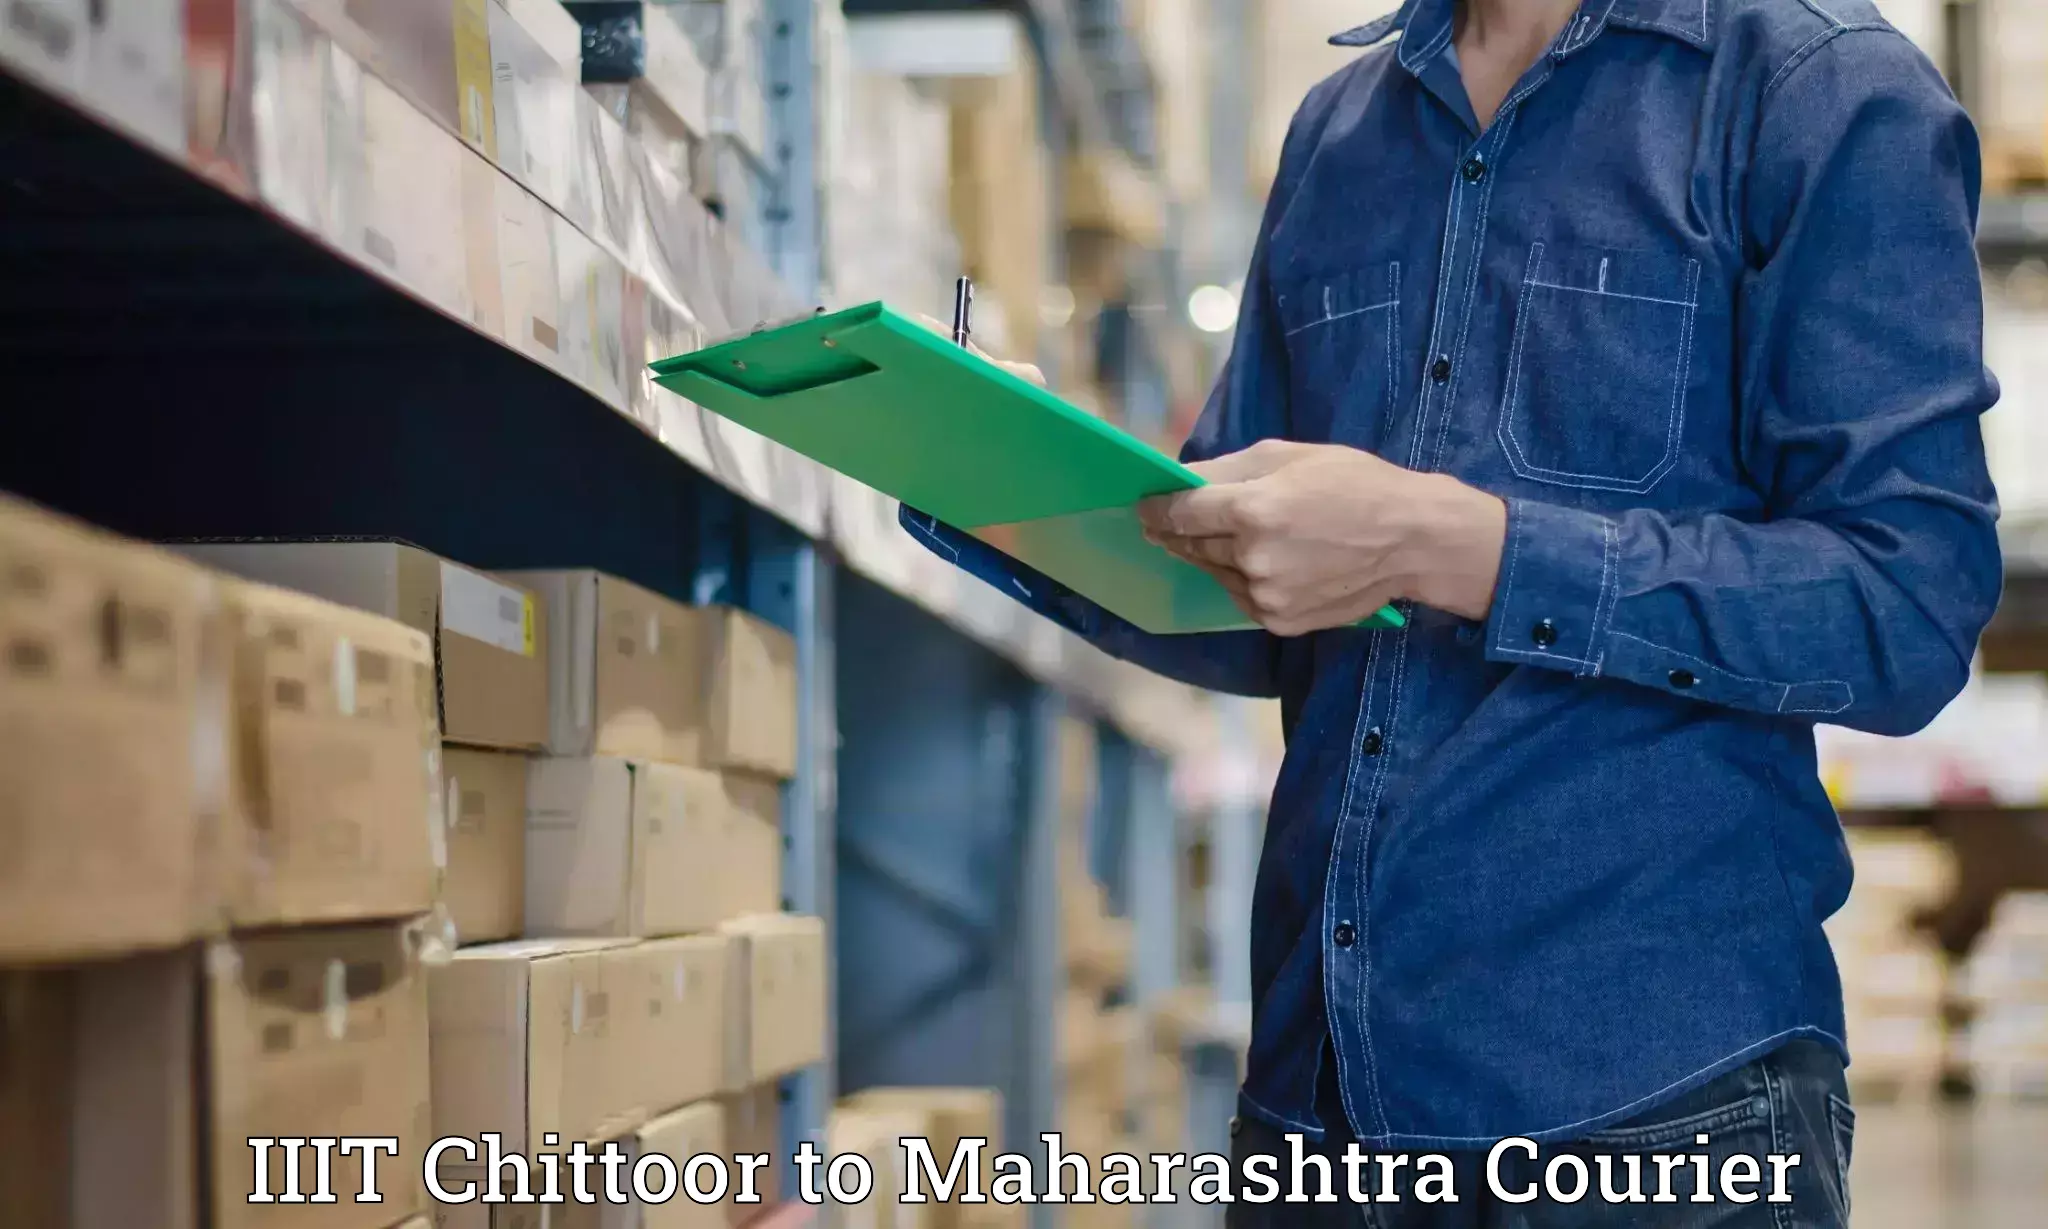 Courier service comparison IIIT Chittoor to Supe